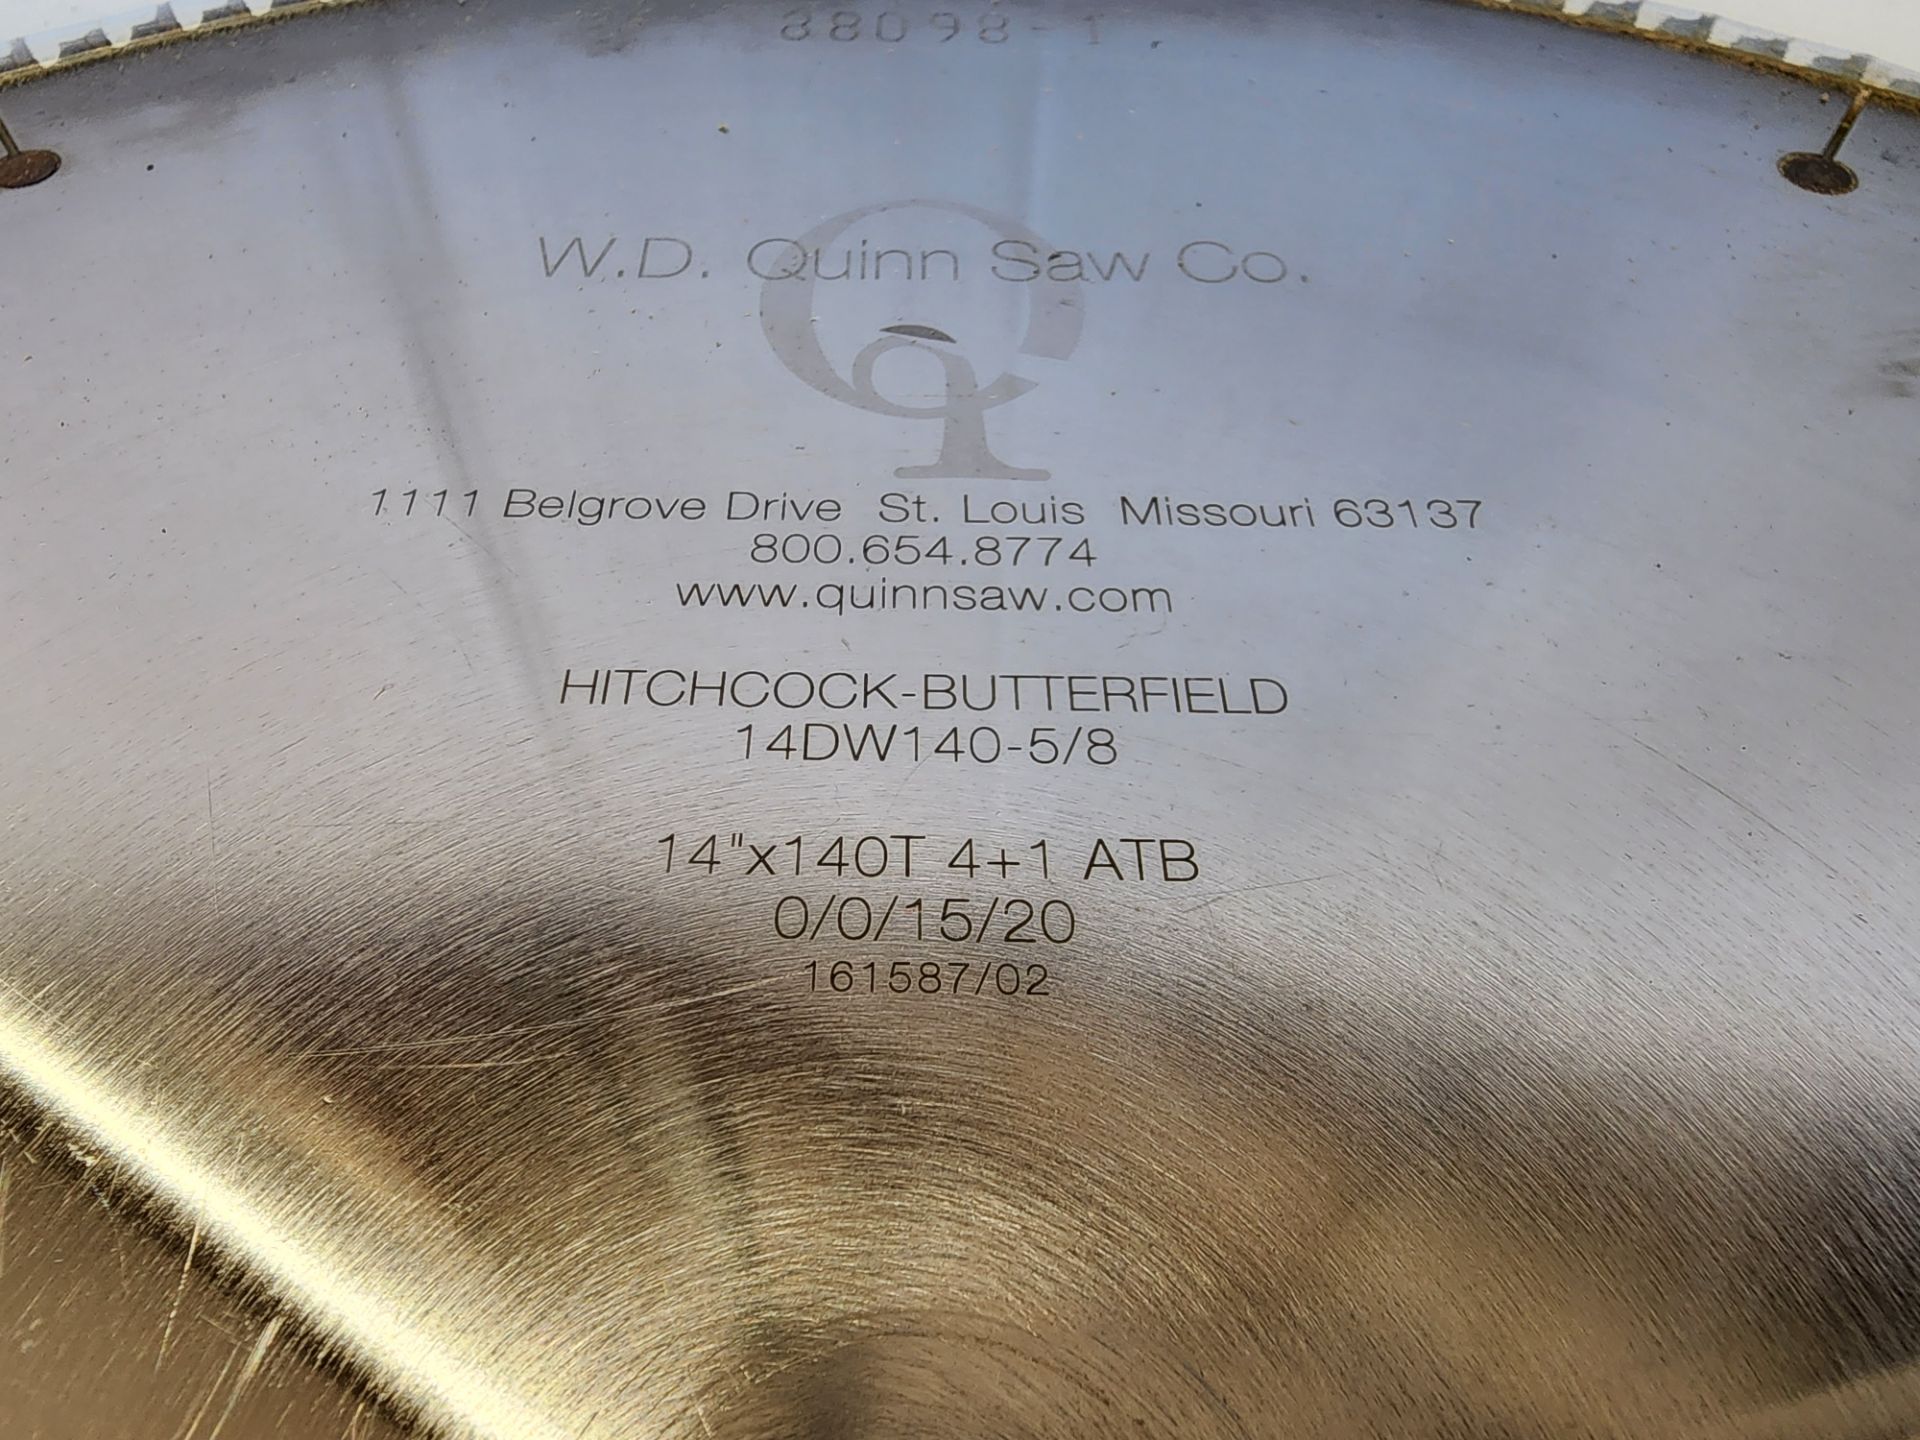 W.D. Quinn Saw Co. Blade, Size: 14DW140-58 / 14" x 140T 4+1 ATB - Image 3 of 3